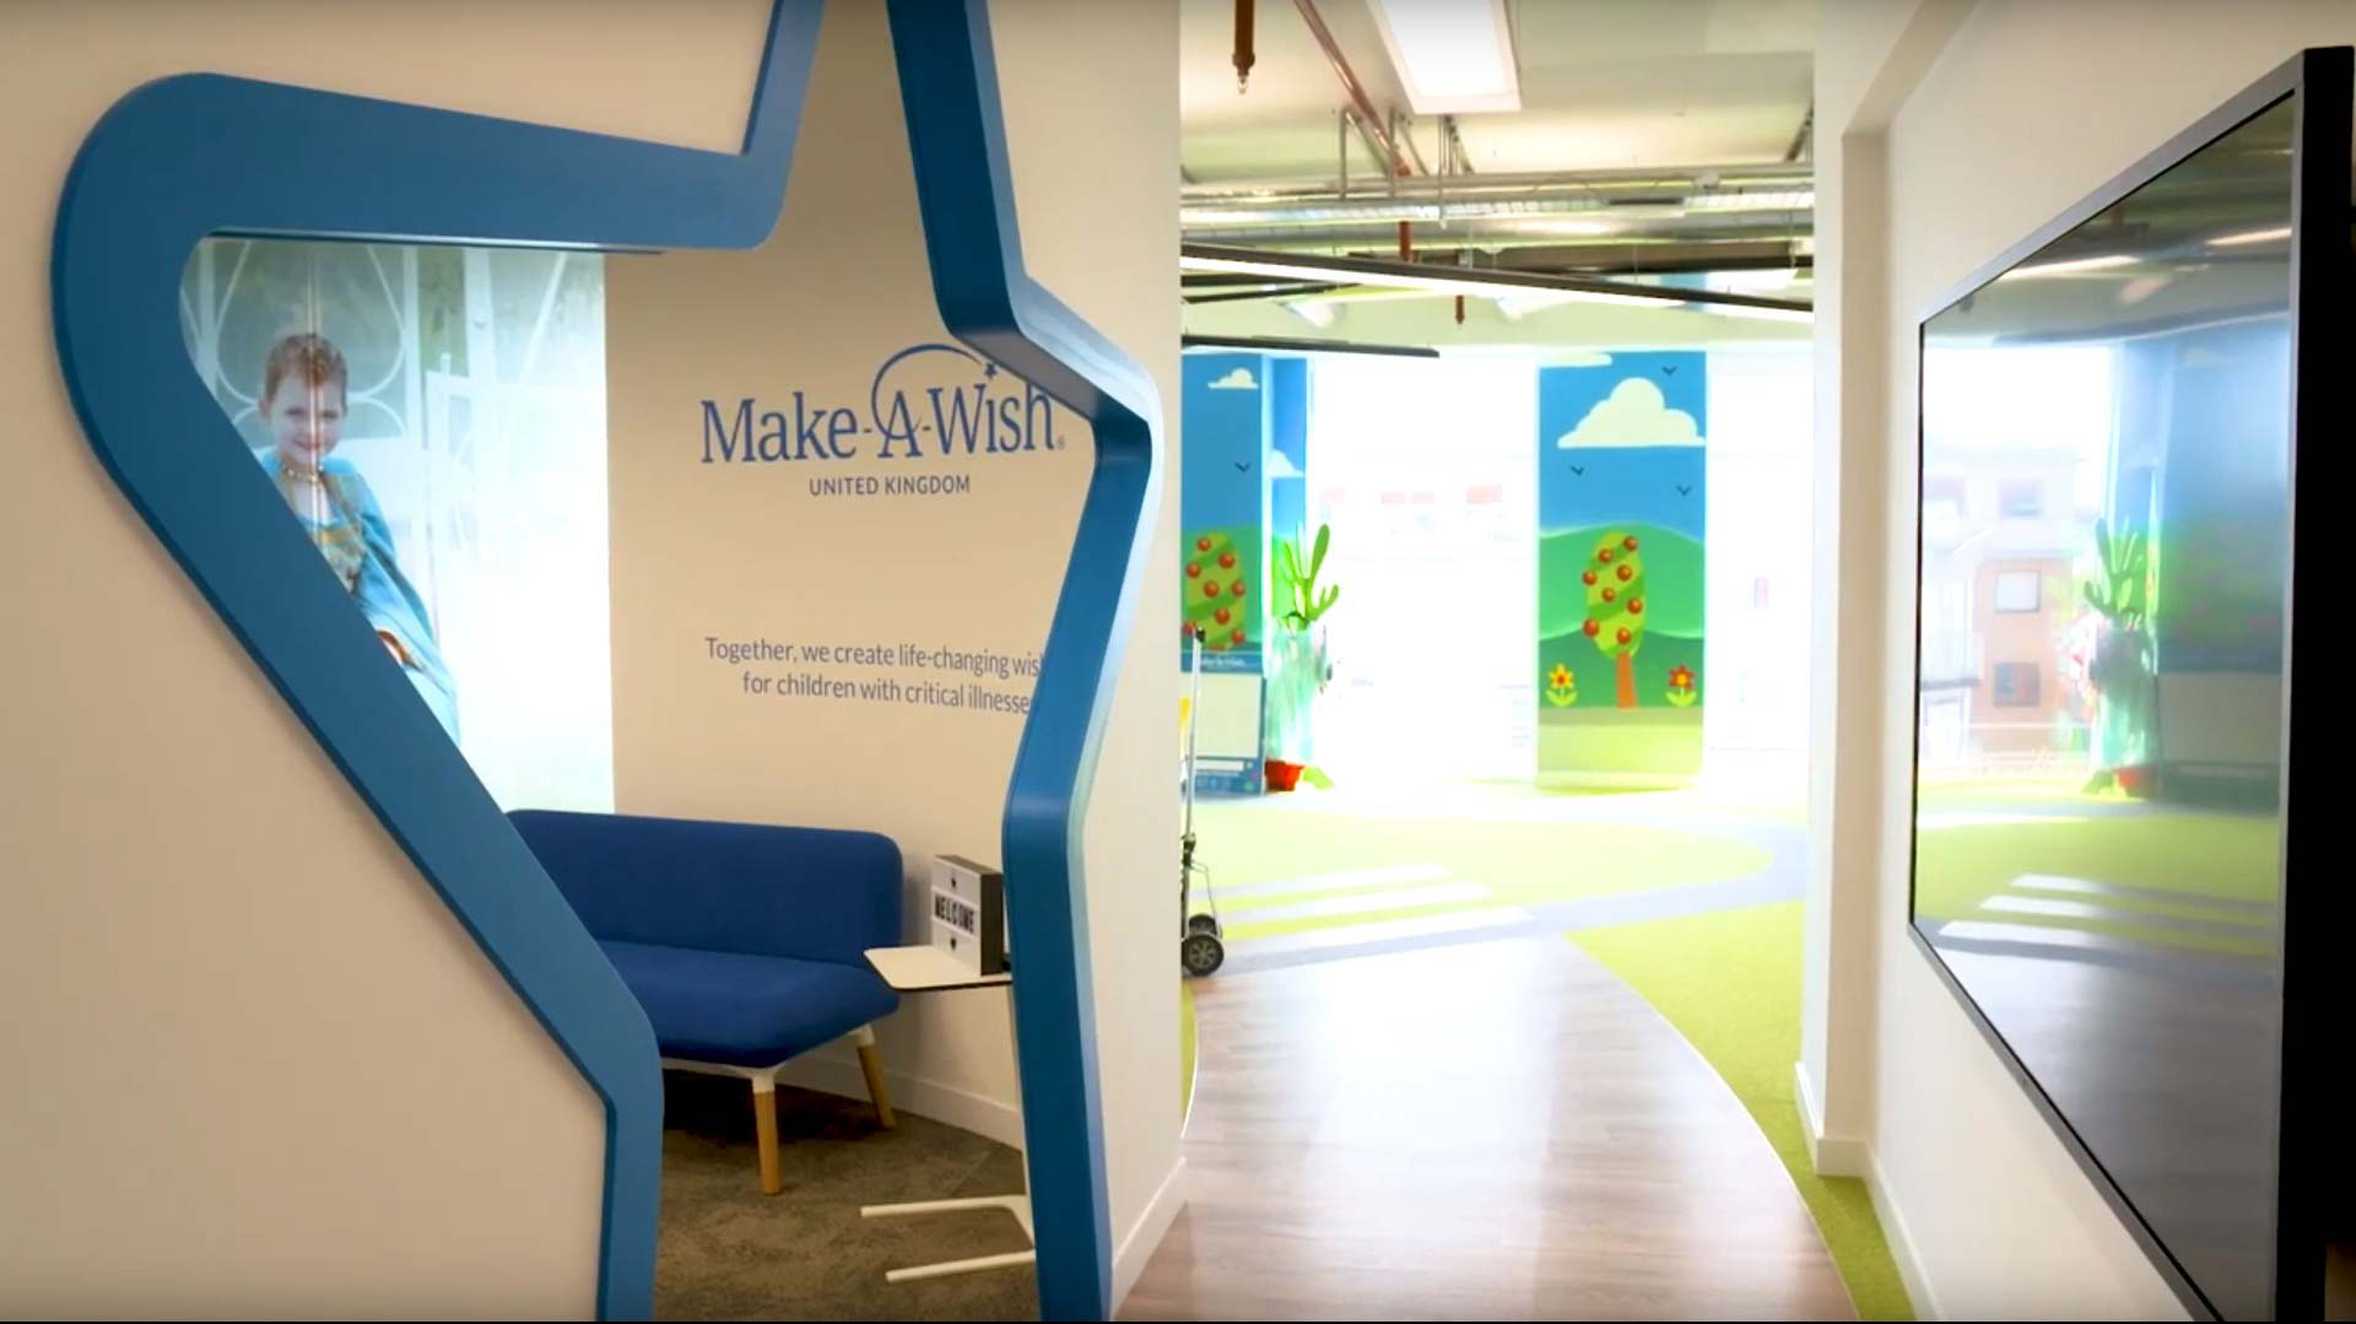 The entrance to the Make-A-Wish Community Hub